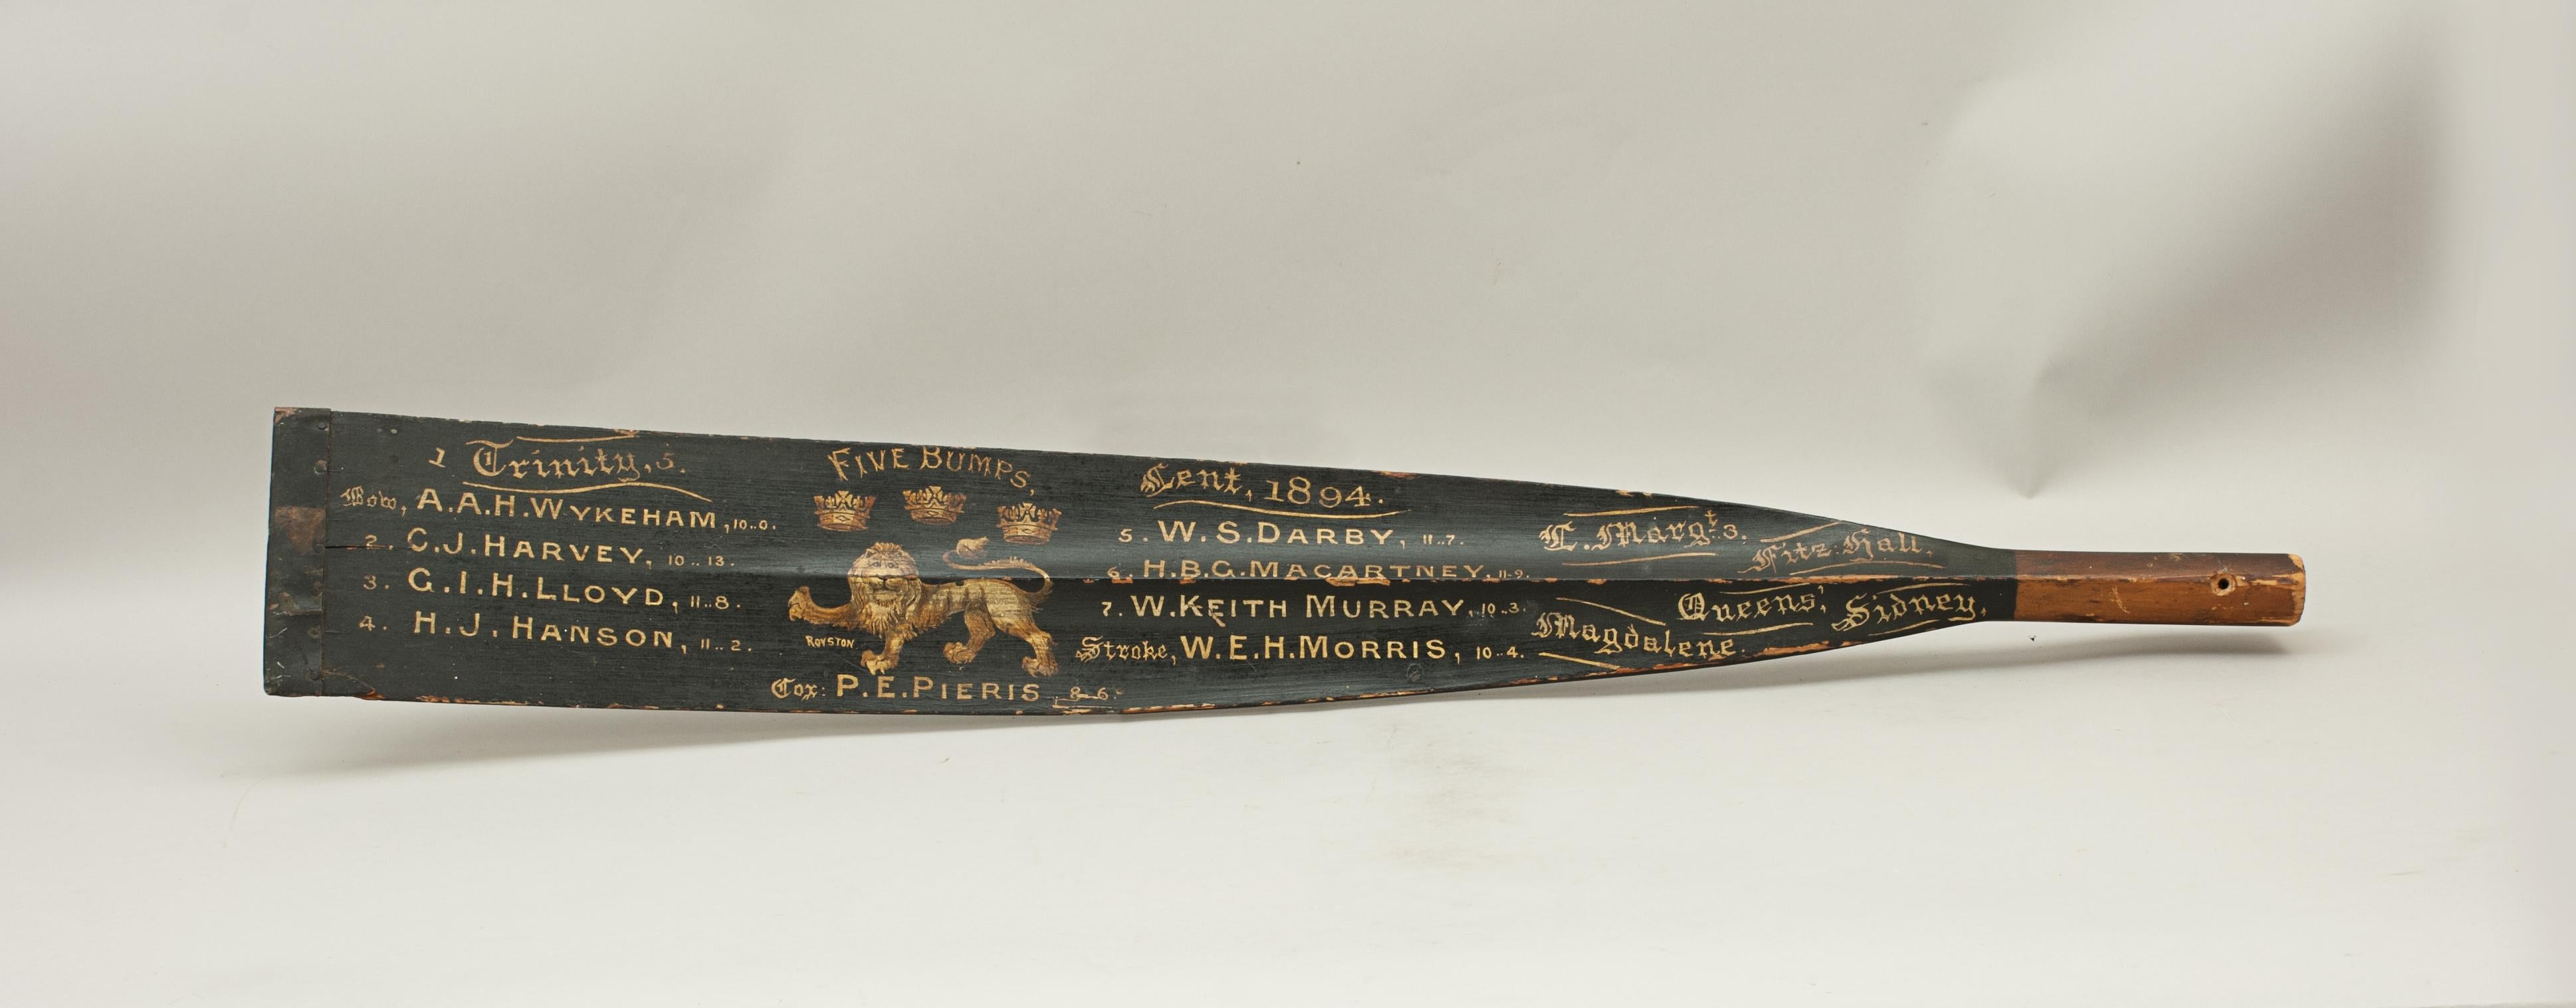 Cambridge Presentation Oar, Trophy Blade, 1894.
This oar blade tip is an original traditional Trinity College (Cambridge University) presentation rowing oar tip with calligraphy and The 1st Trinity Boat Club insignia. The paint and writing on the